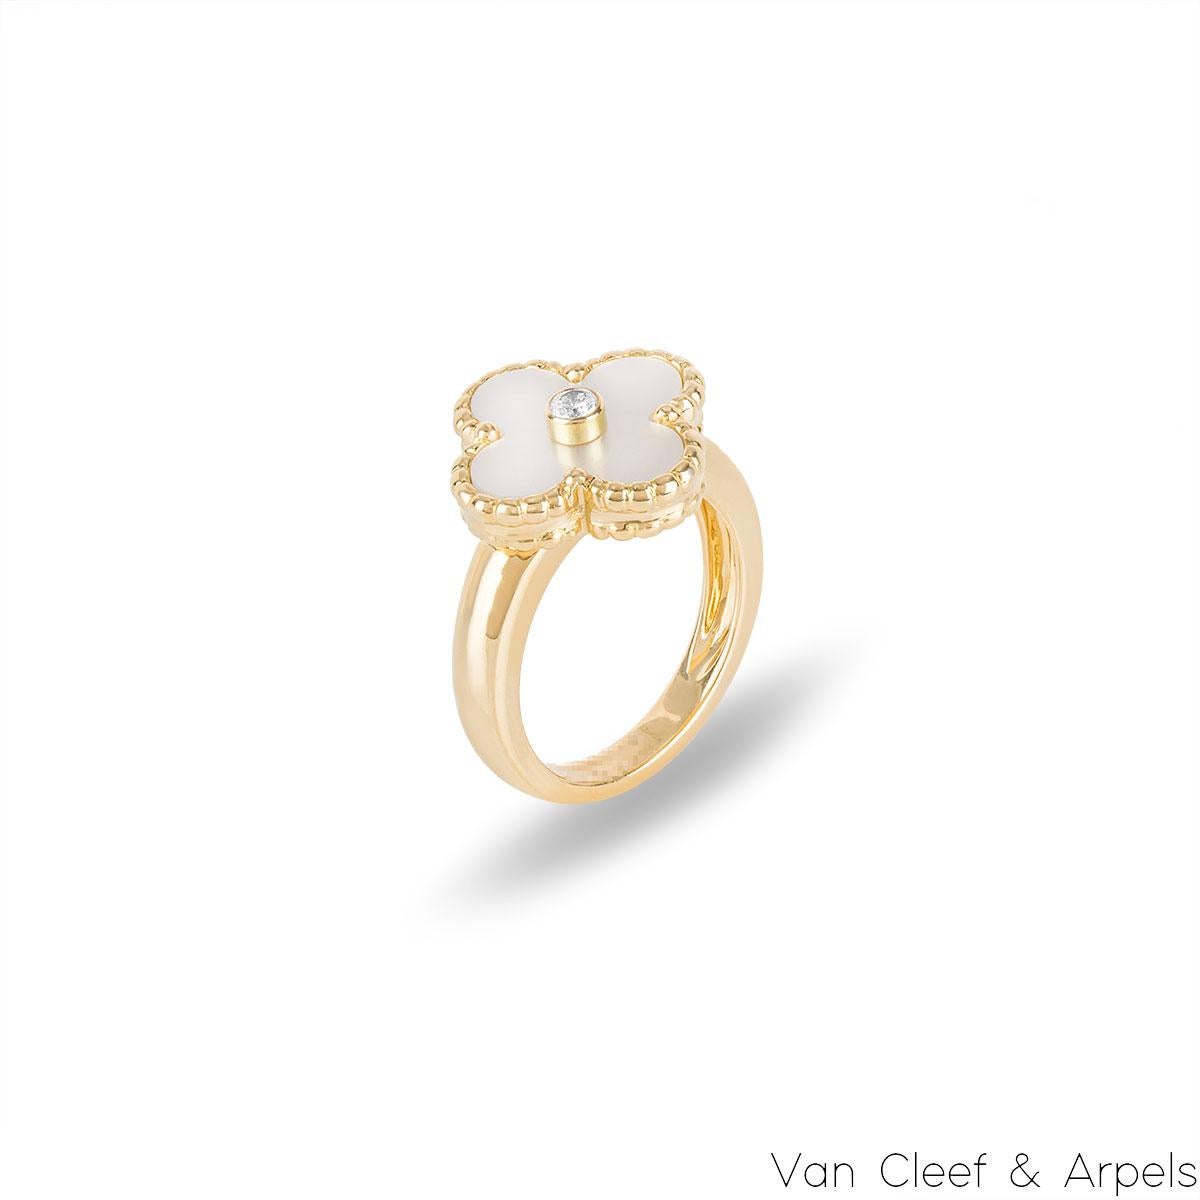 A beautiful 18k yellow gold mother of pearl Van Cleef & Arpels ring from the Vintage Alhambra collection. The ring features the iconic 4-leaf clover motif with a mother of pearl inlay, complemented by a beaded edge and a round brilliant cut diamond